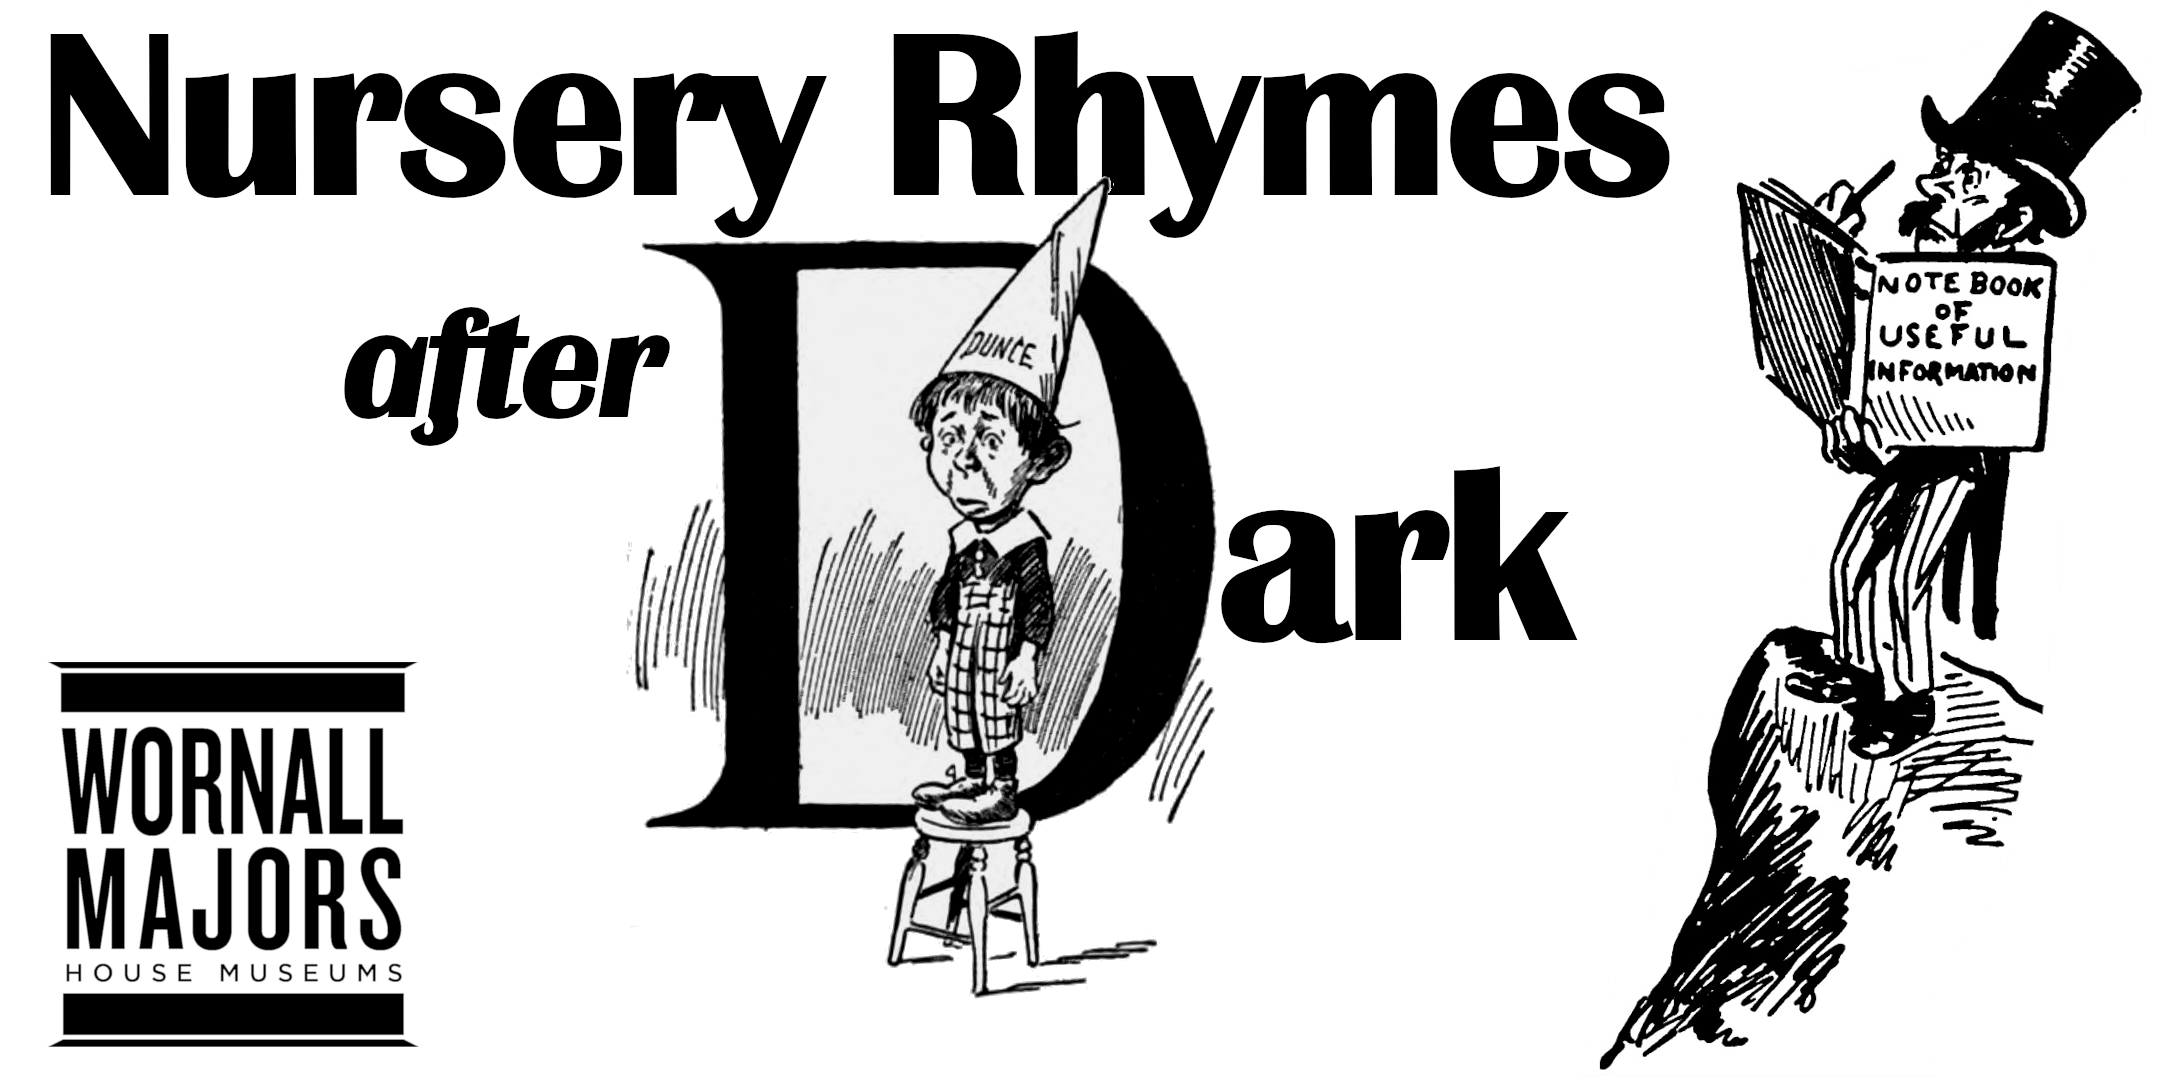 Thumbnail for the post titled: Nursery Rhymes after Dark